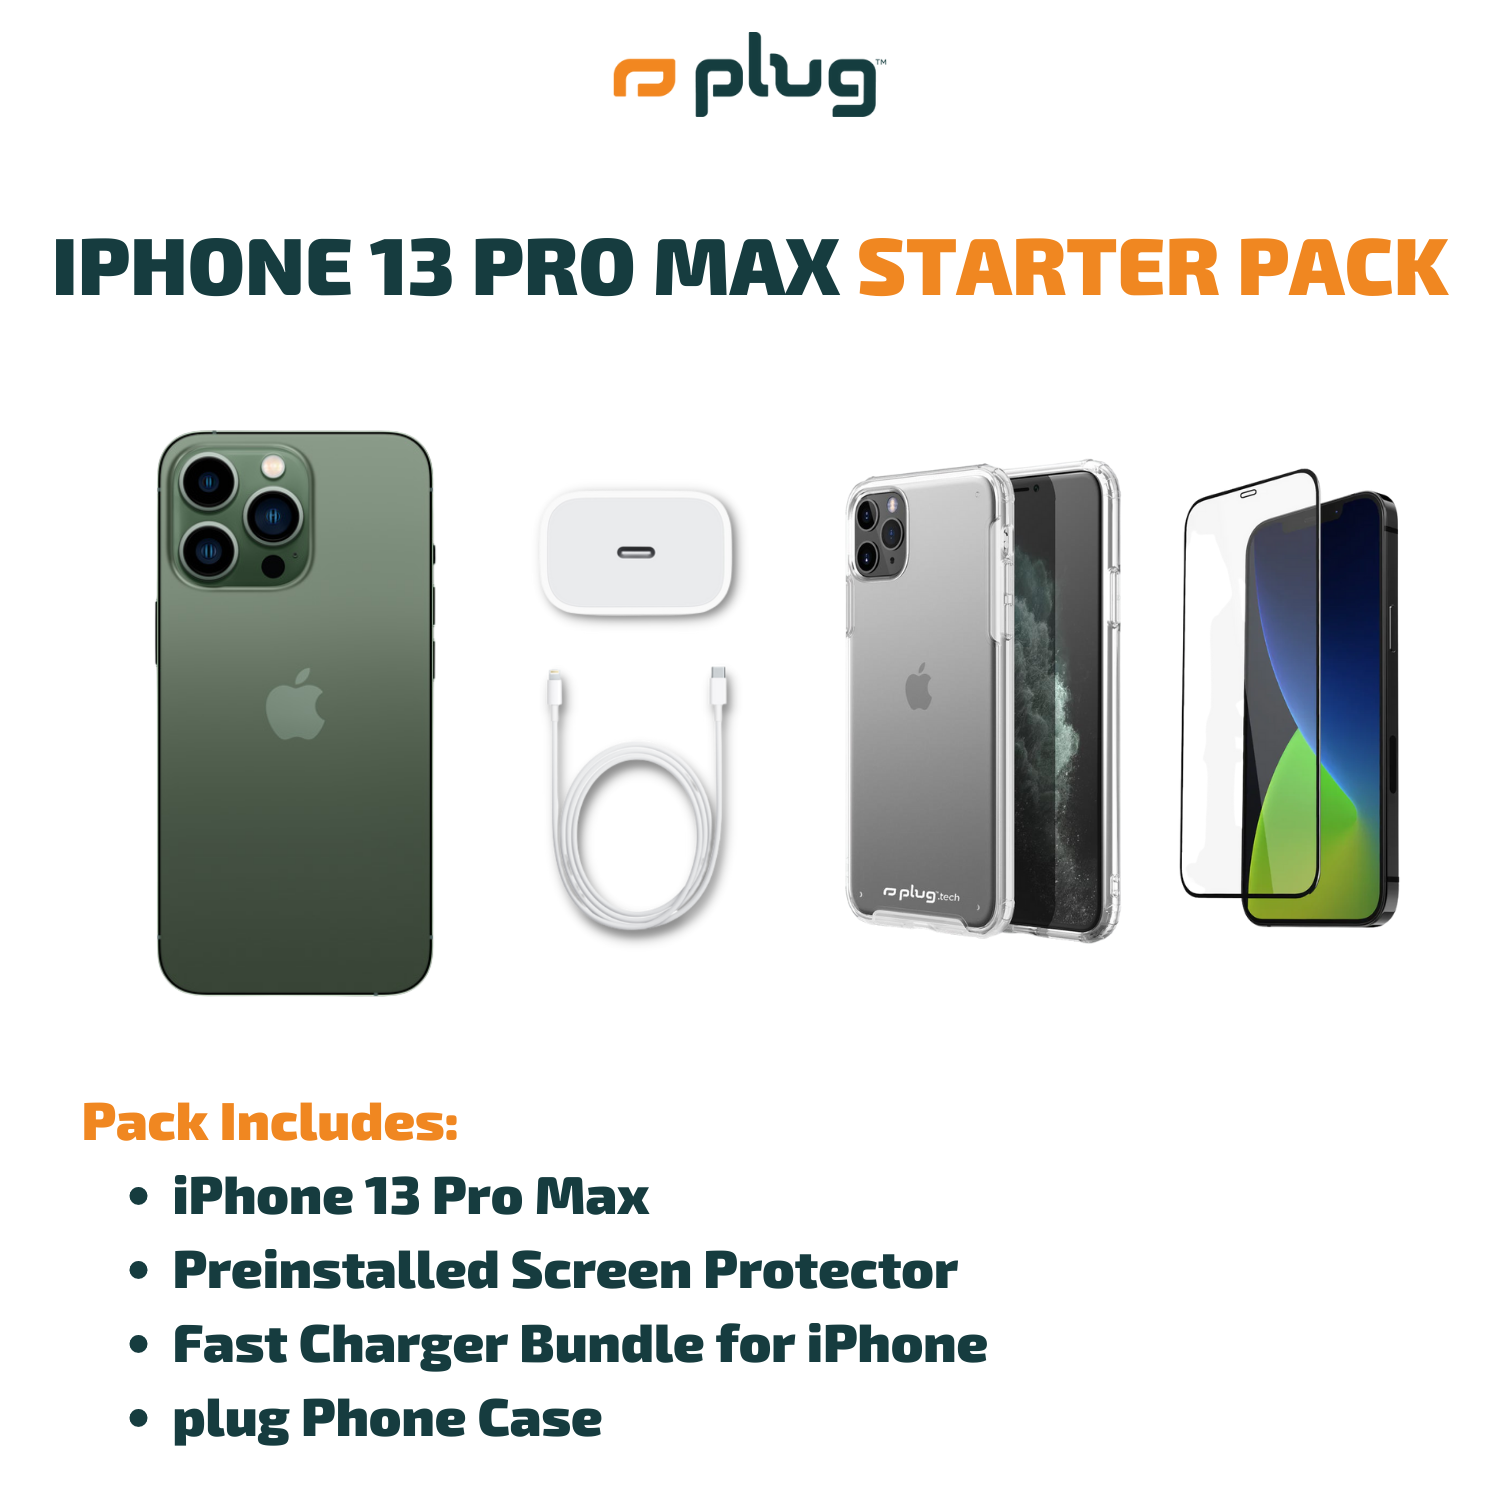 iPhone 13 Pro Max - Starter Pack